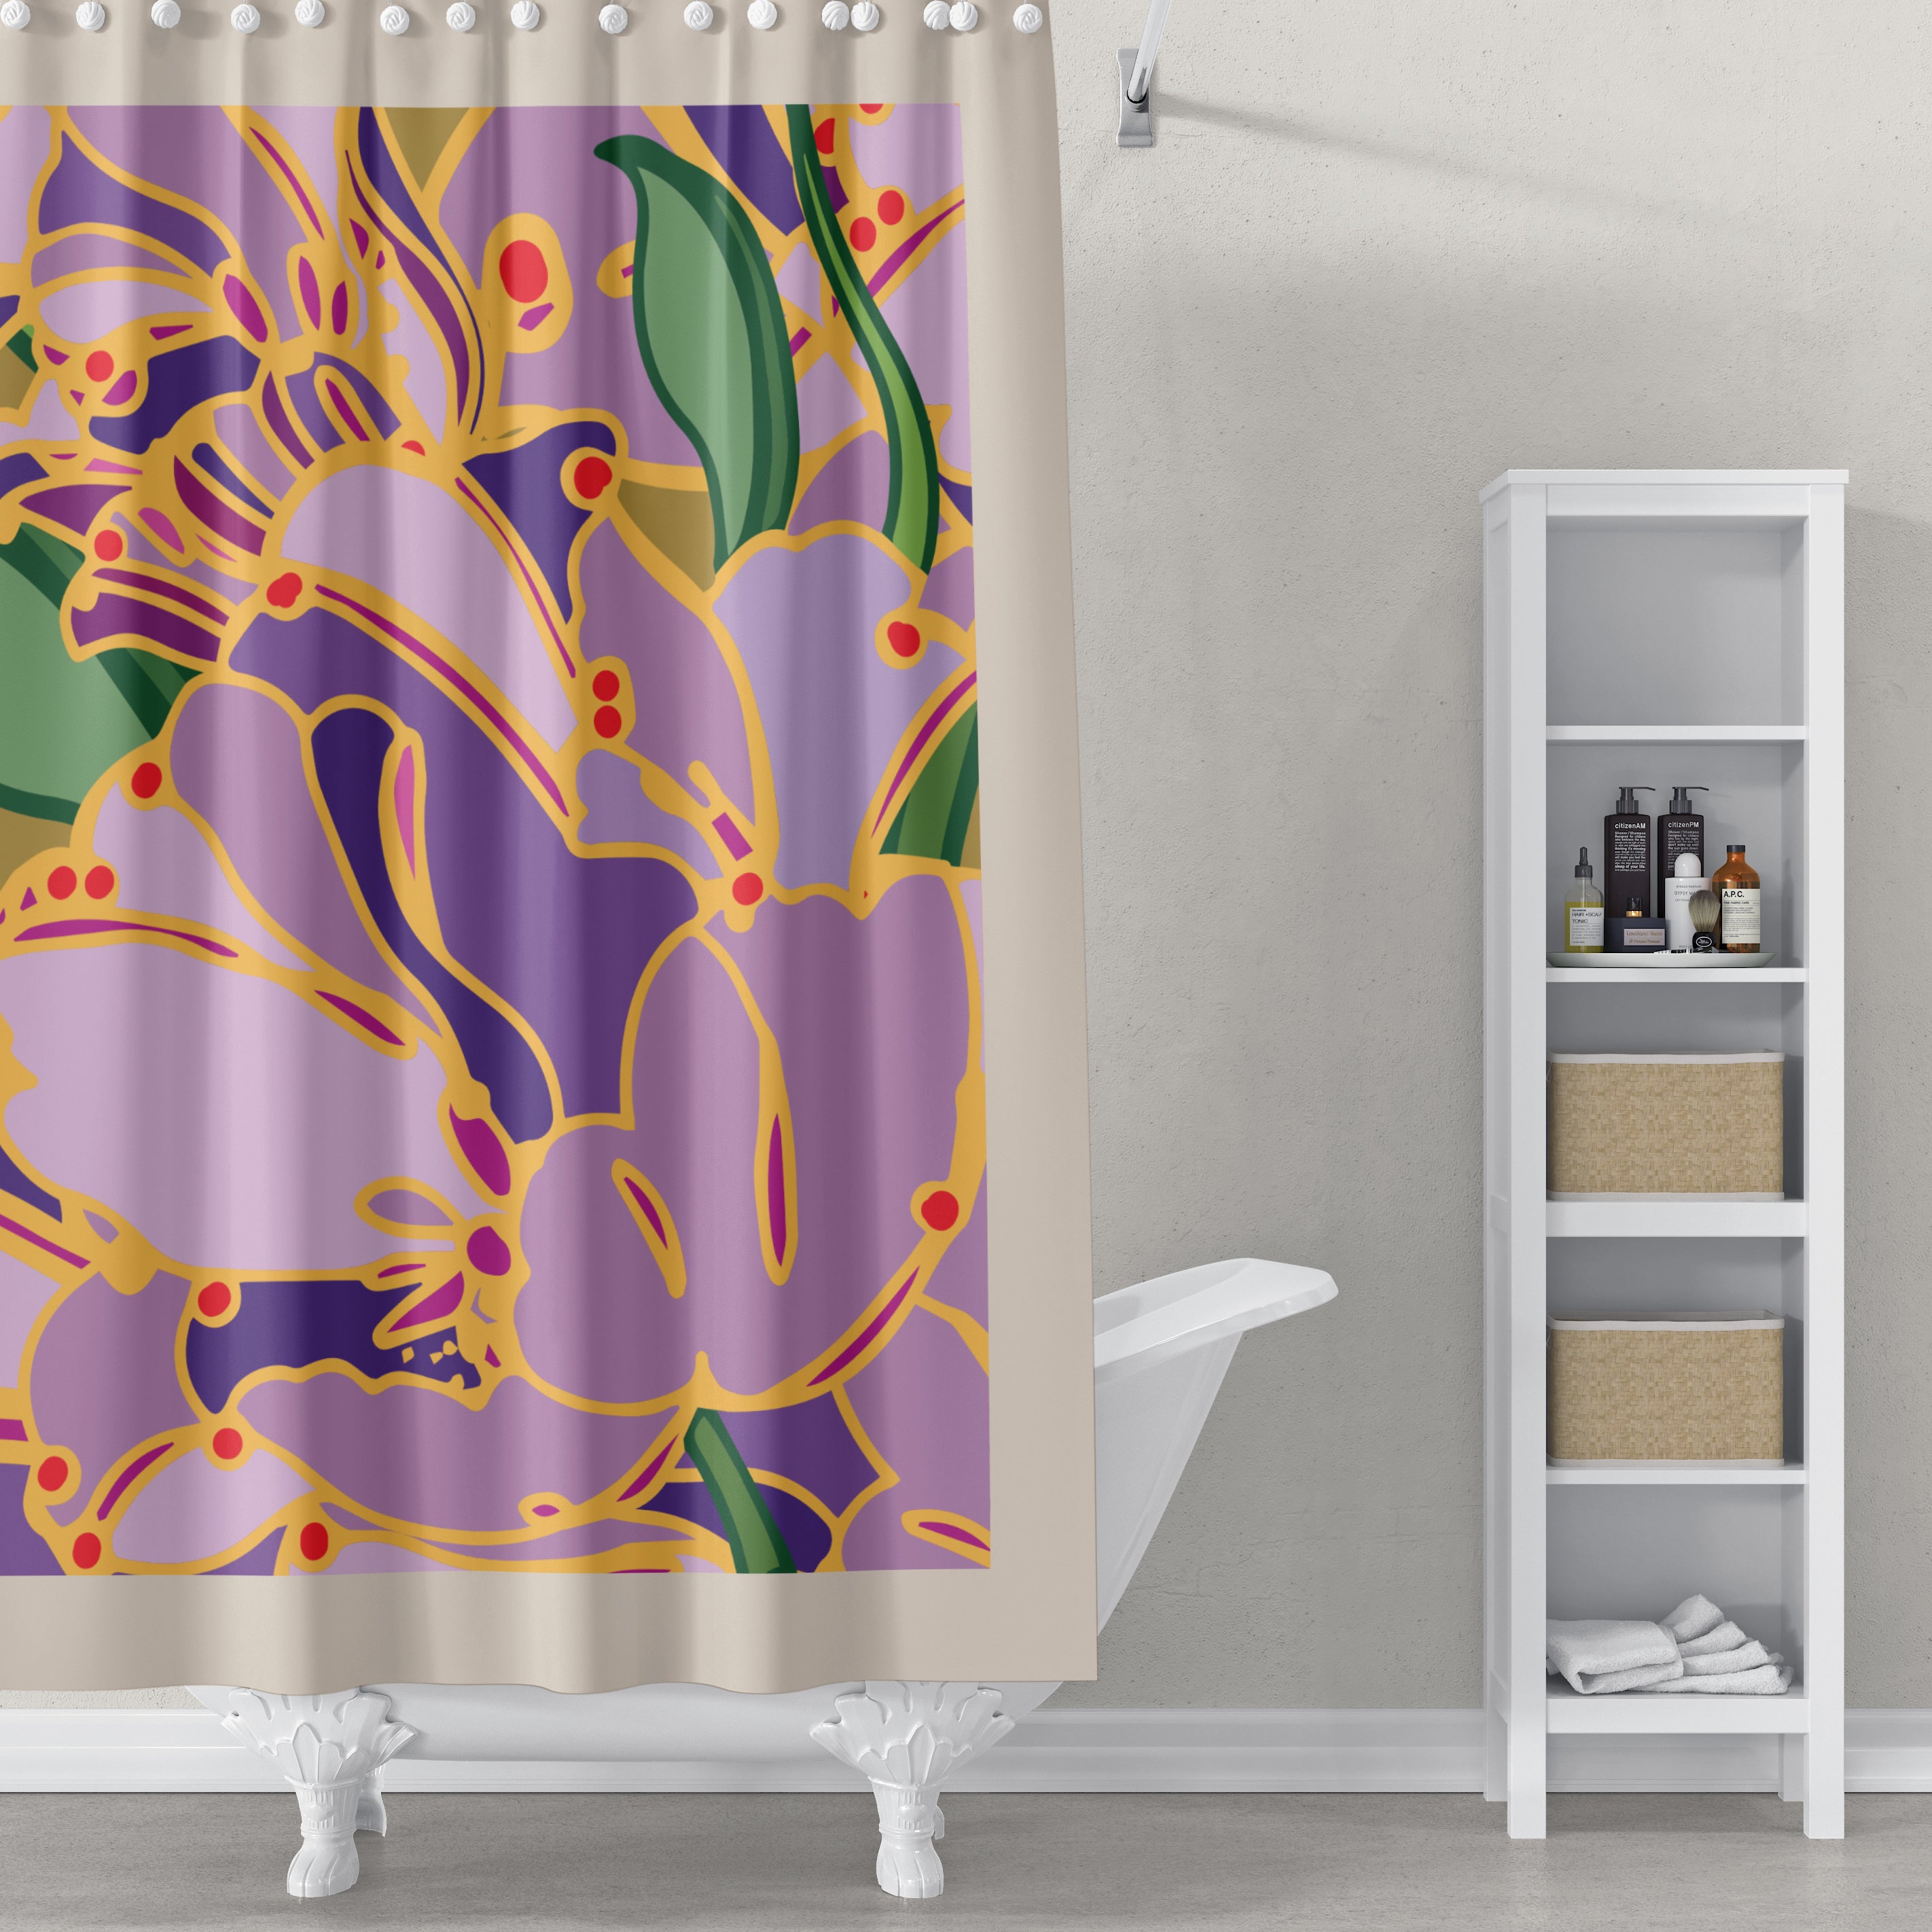 Wall Flower: Purple Lily Shower Curtain